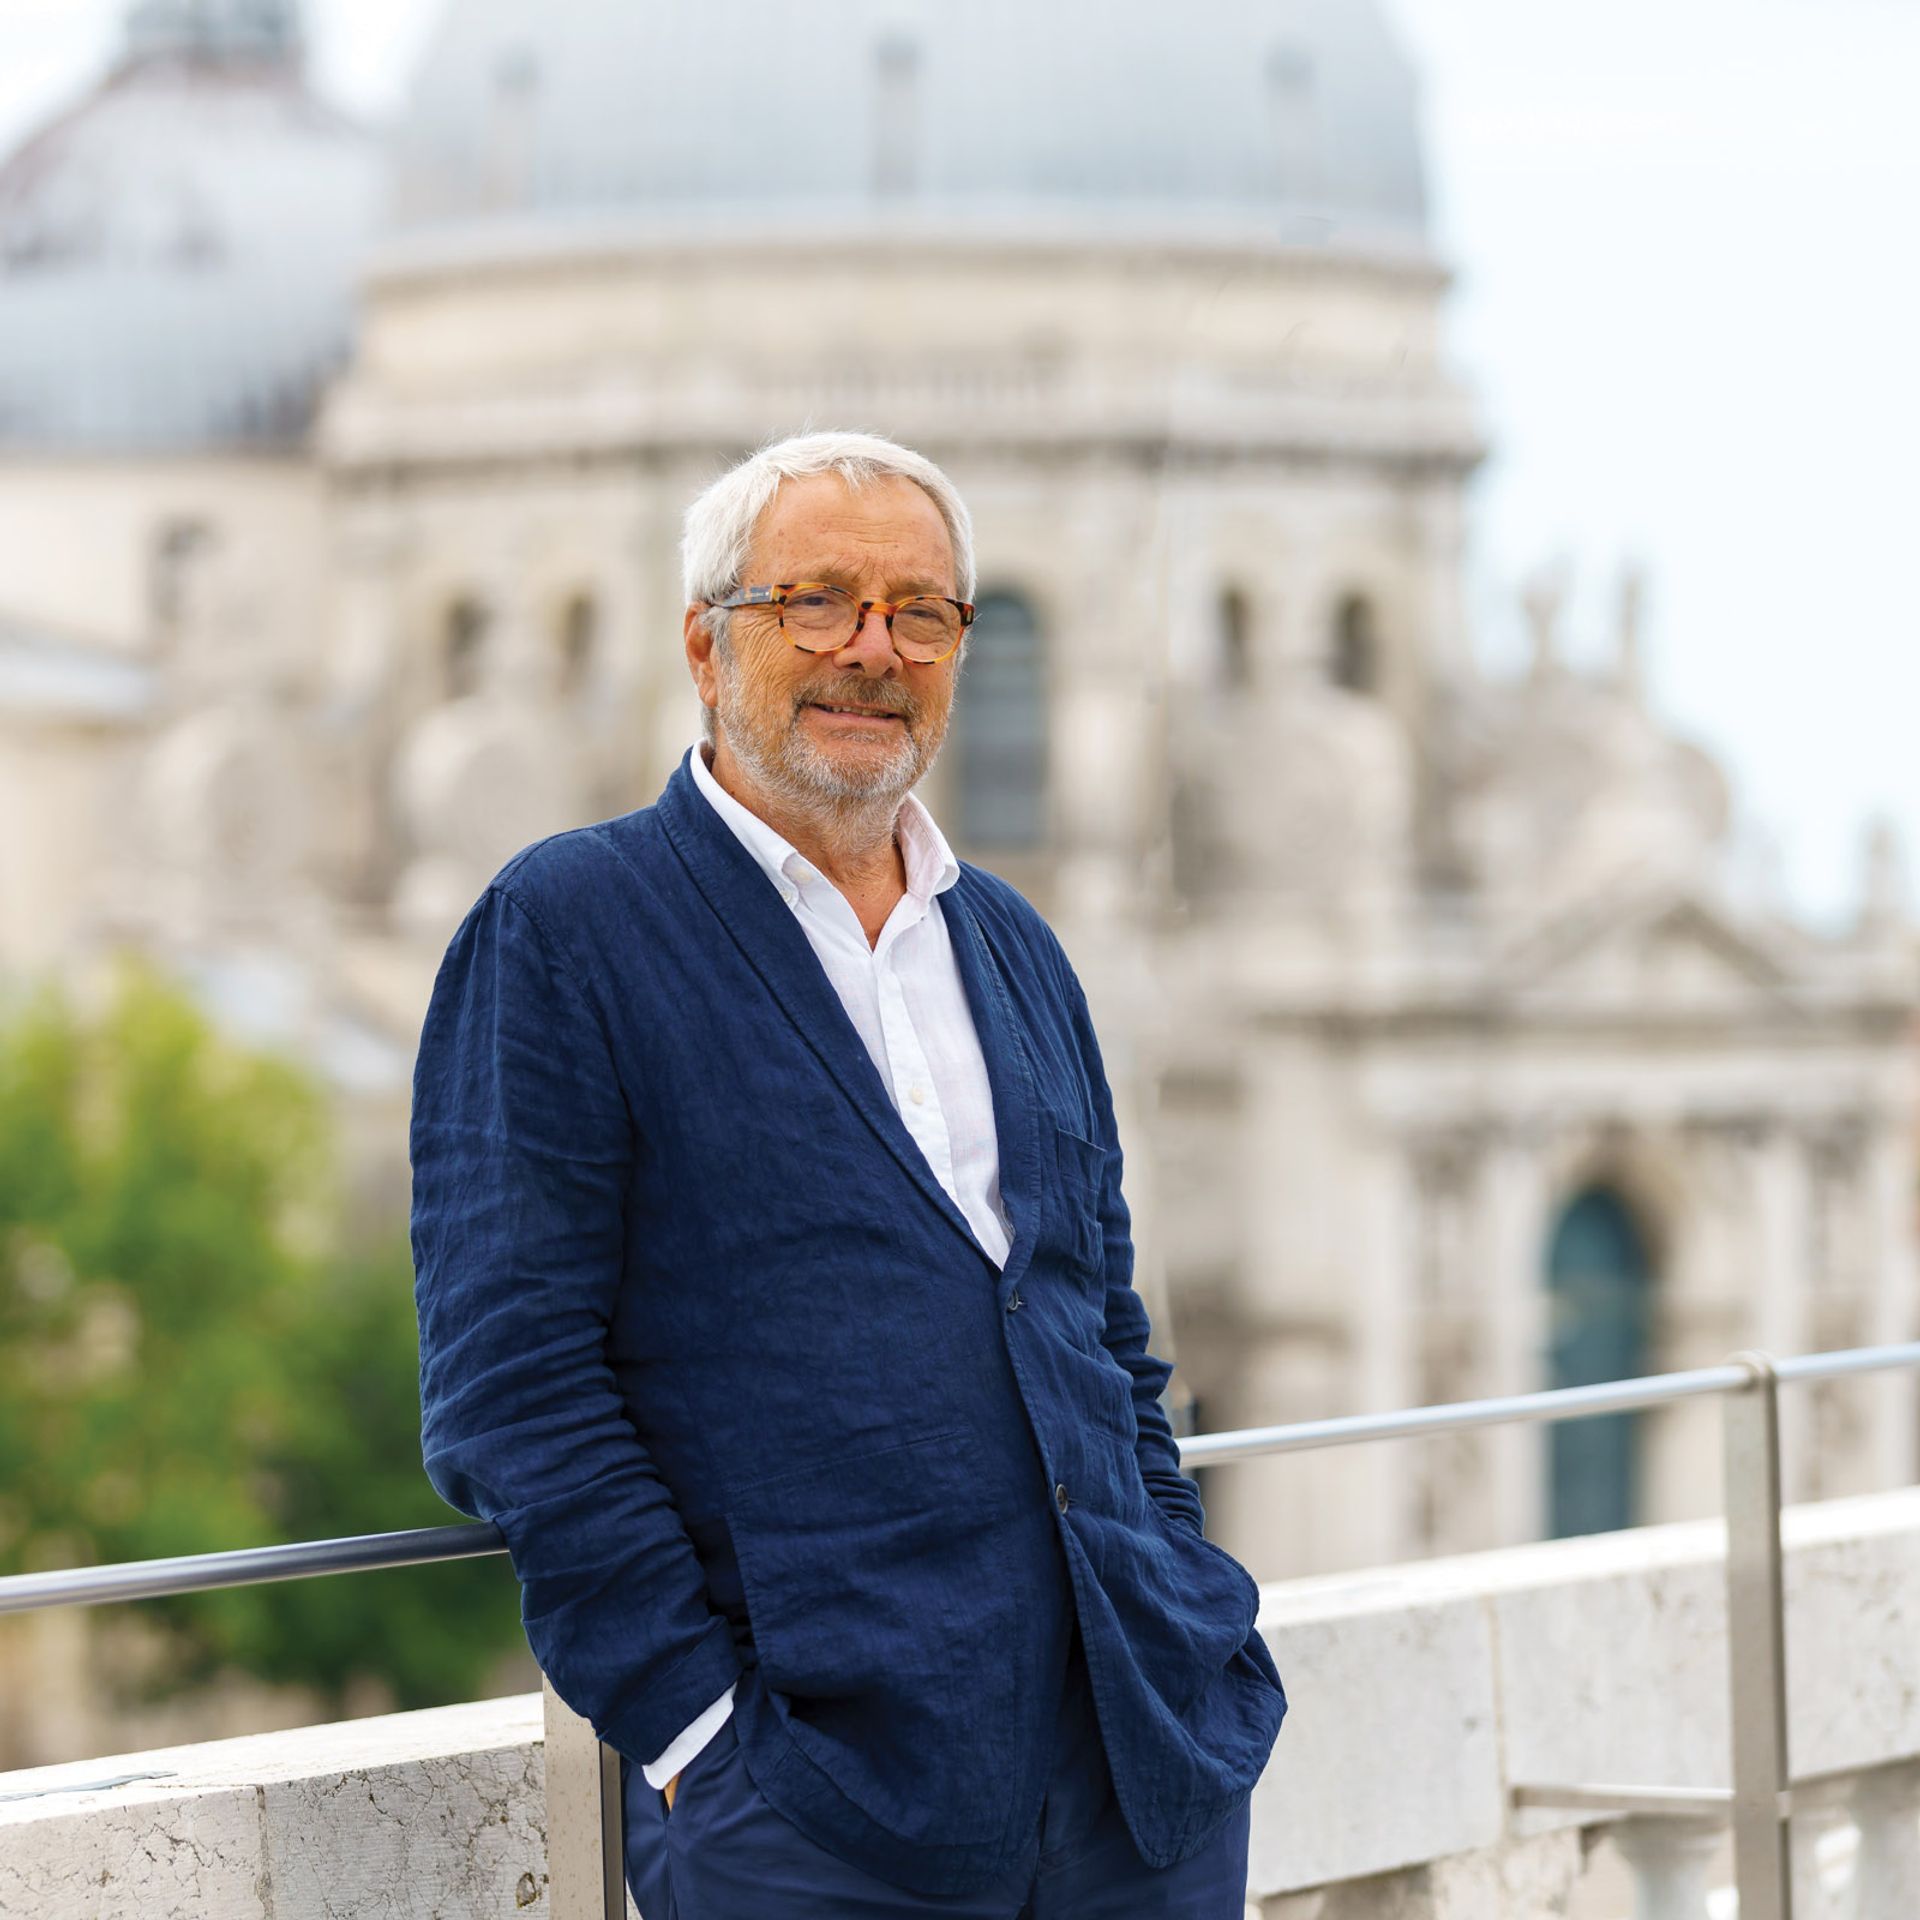 Appointed as the Venice Biennale’s president in 2020, Roberto Cicutto had to wade through choppy waters as Covid-19 hit the arts, but  collaboration could be the key to changing the organisation’s fortunes Courtesy of Venice Biennale